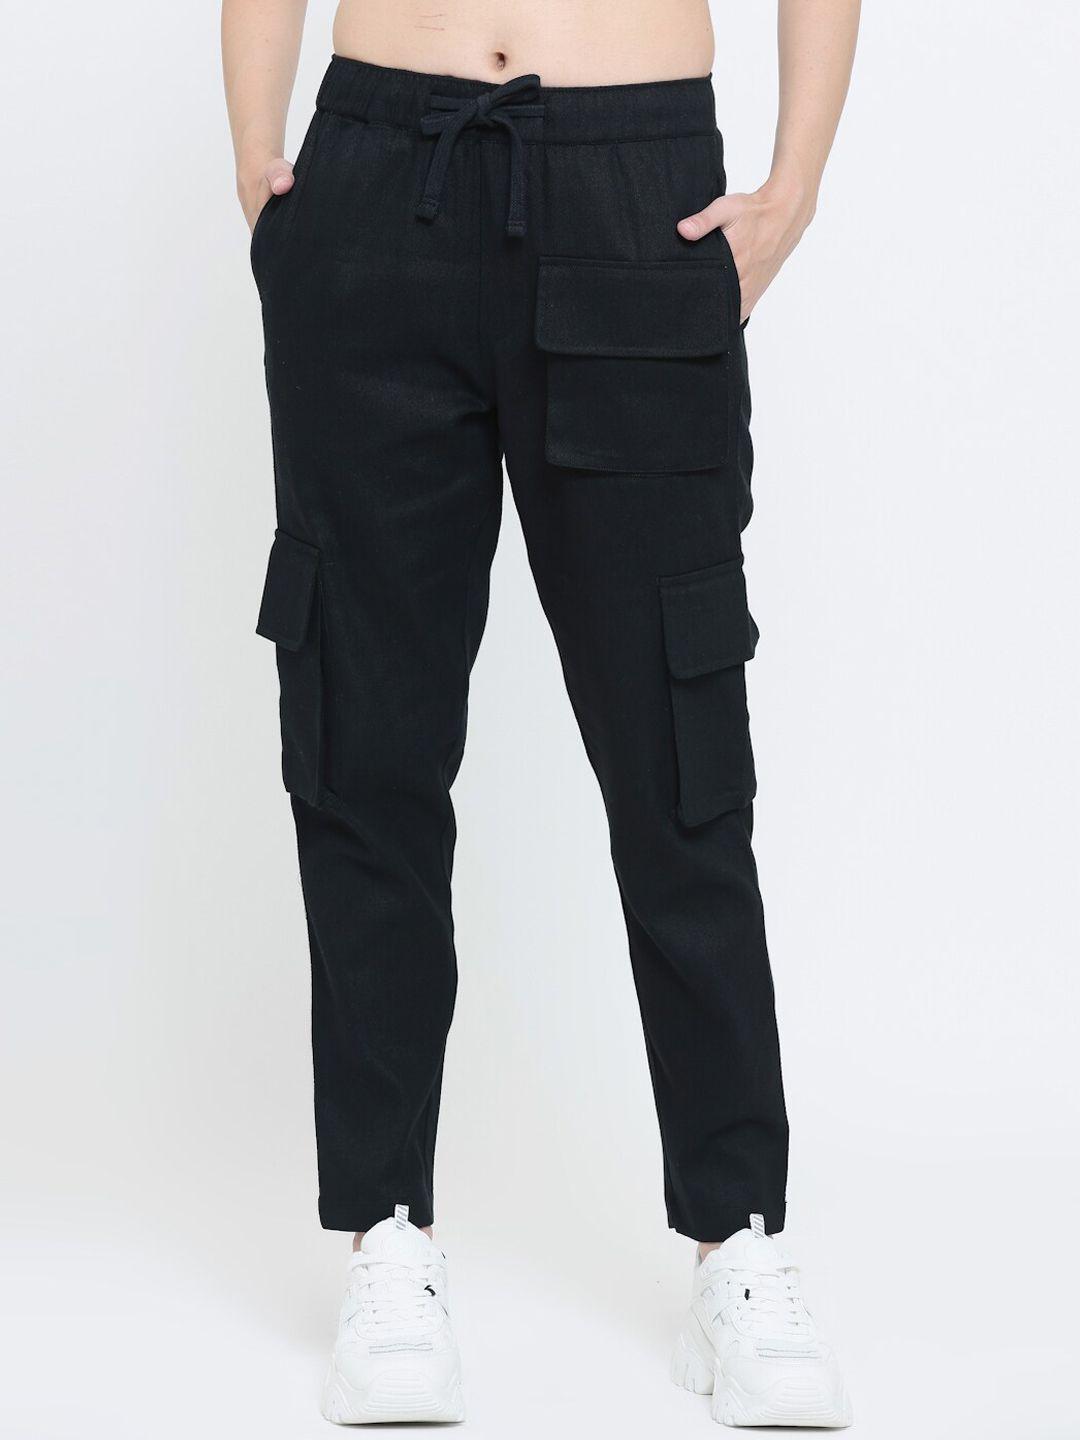 everdion women black relaxed straight leg straight fit cargos trousers